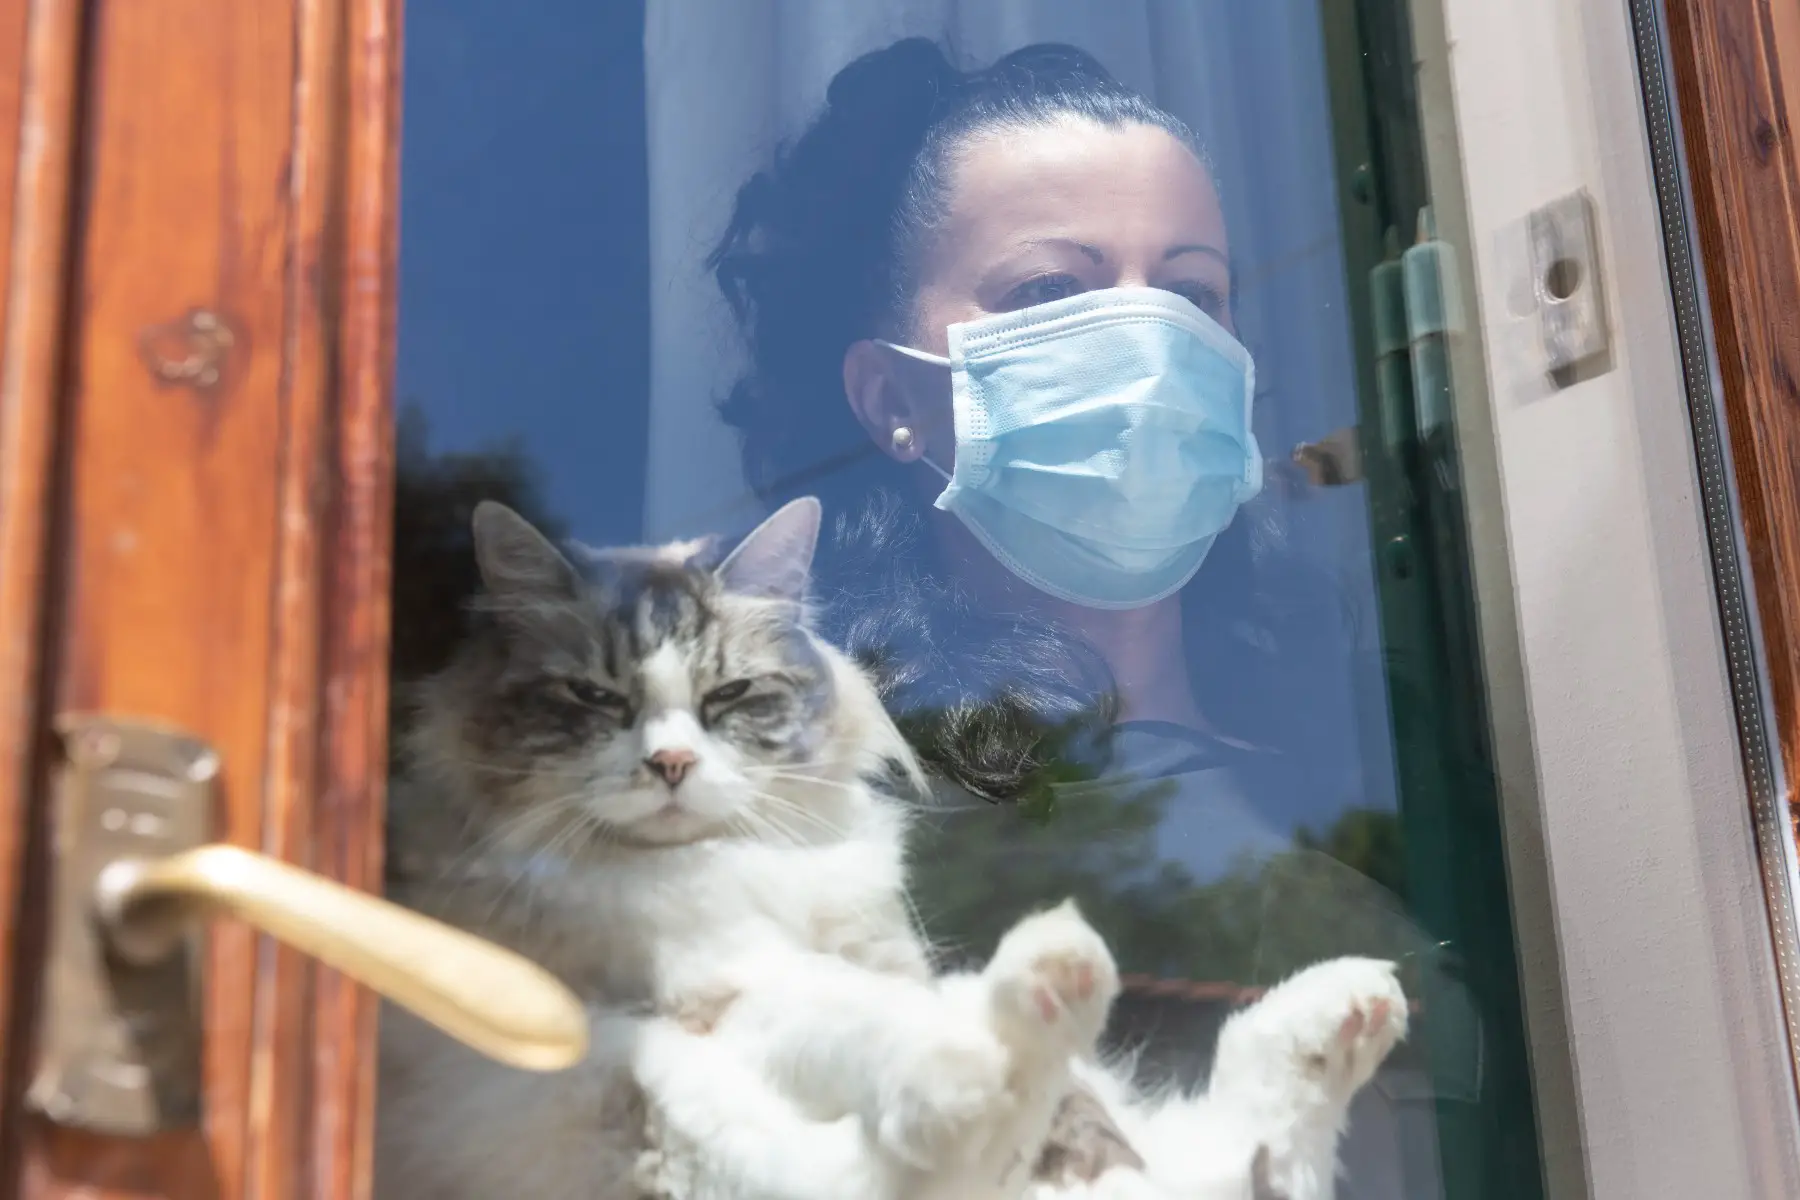 Woman holding a cat behind a window wearing a protective face mask.